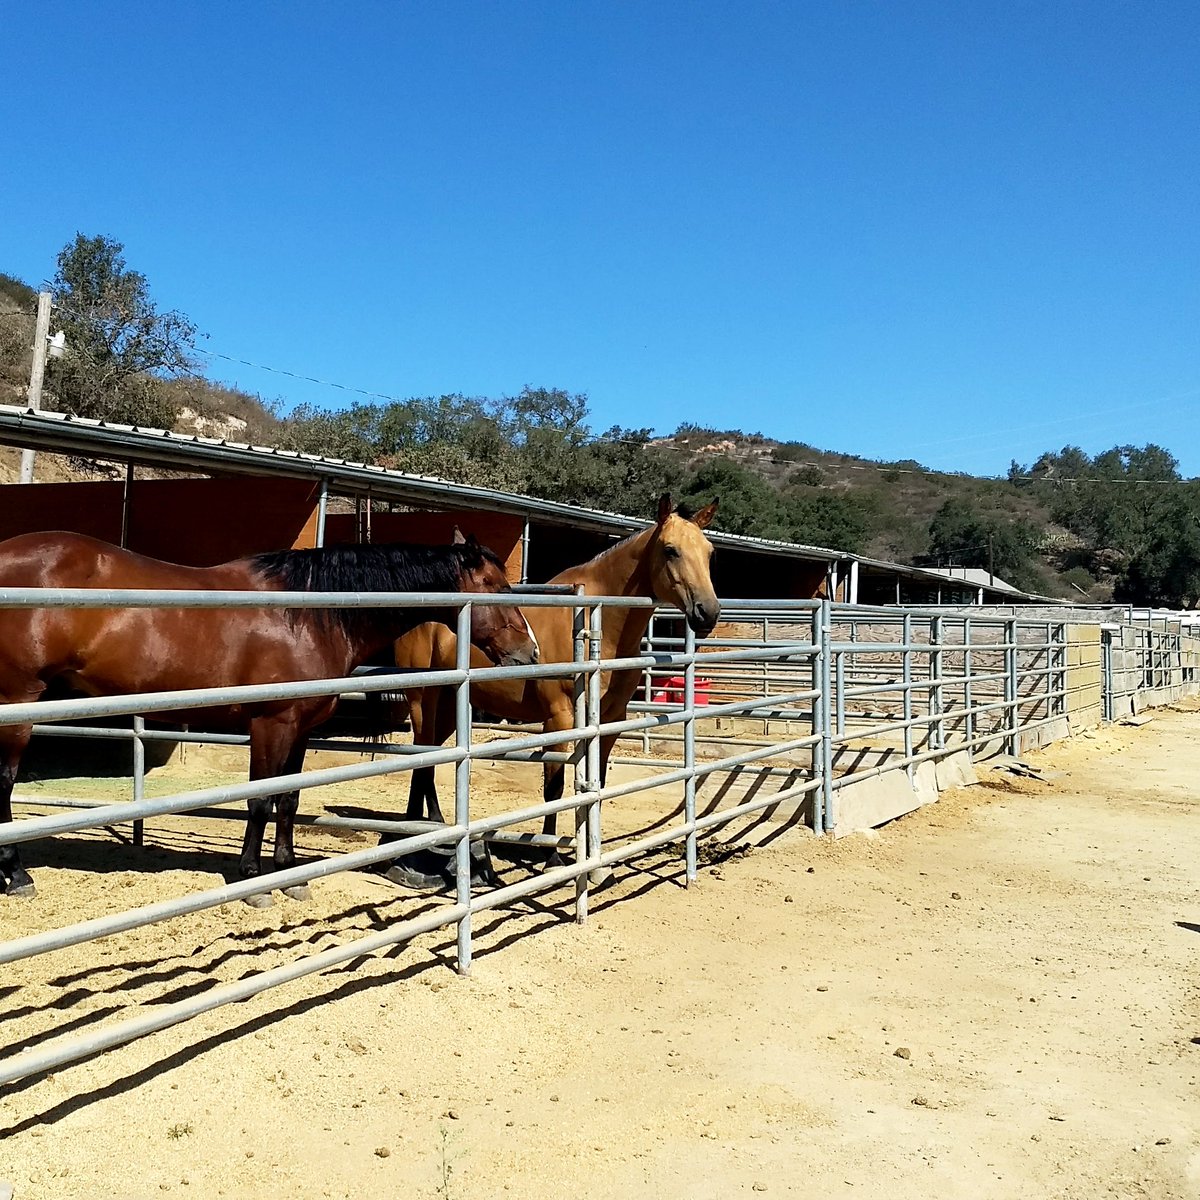 Anyone who haven't experience horseback riding? Try it out in Santiago Equestrian Center located at 18381 E Santiago Canyon Rd.
#horseback #horsebackriding #riding #horseriding #horses #horseranch #horseride #horseexperience #lakeforest #lakeforestcom